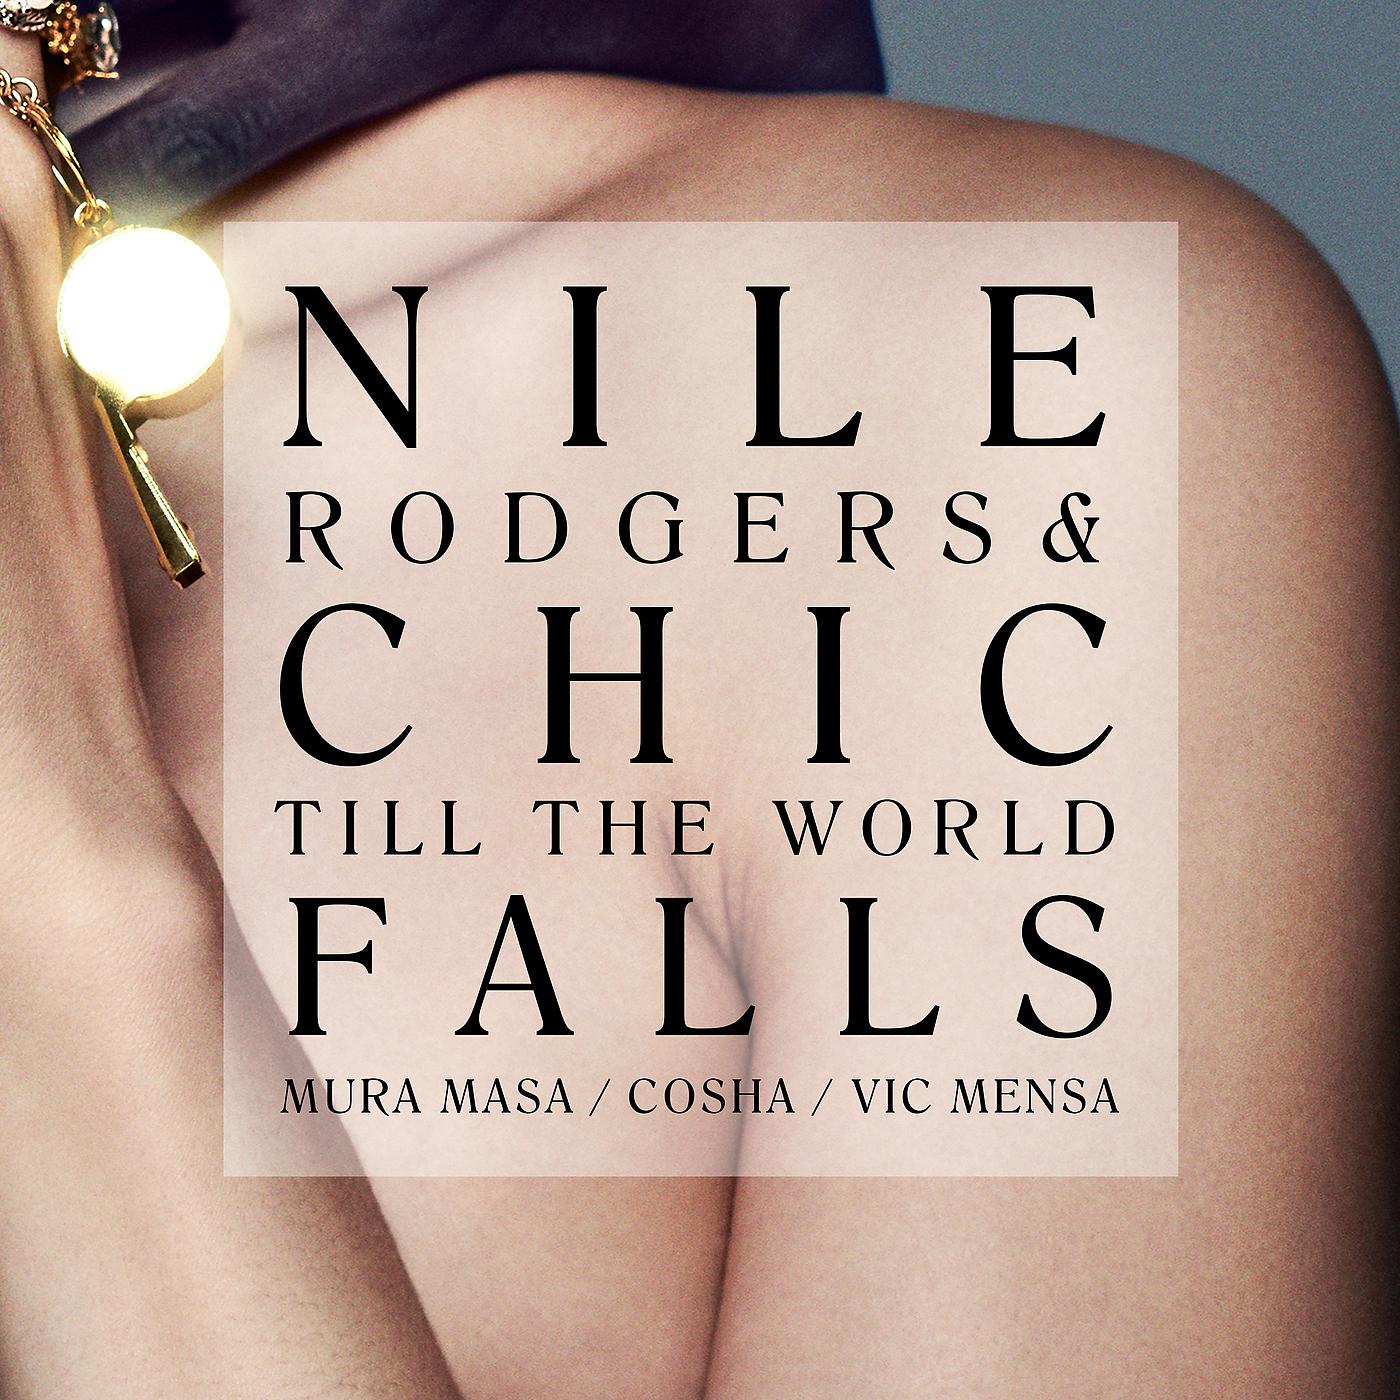 The world is falling. Nile Rodgers & Chic - it's about time. Franc Moody. Chic its about time album. Chic its about time album Cover.